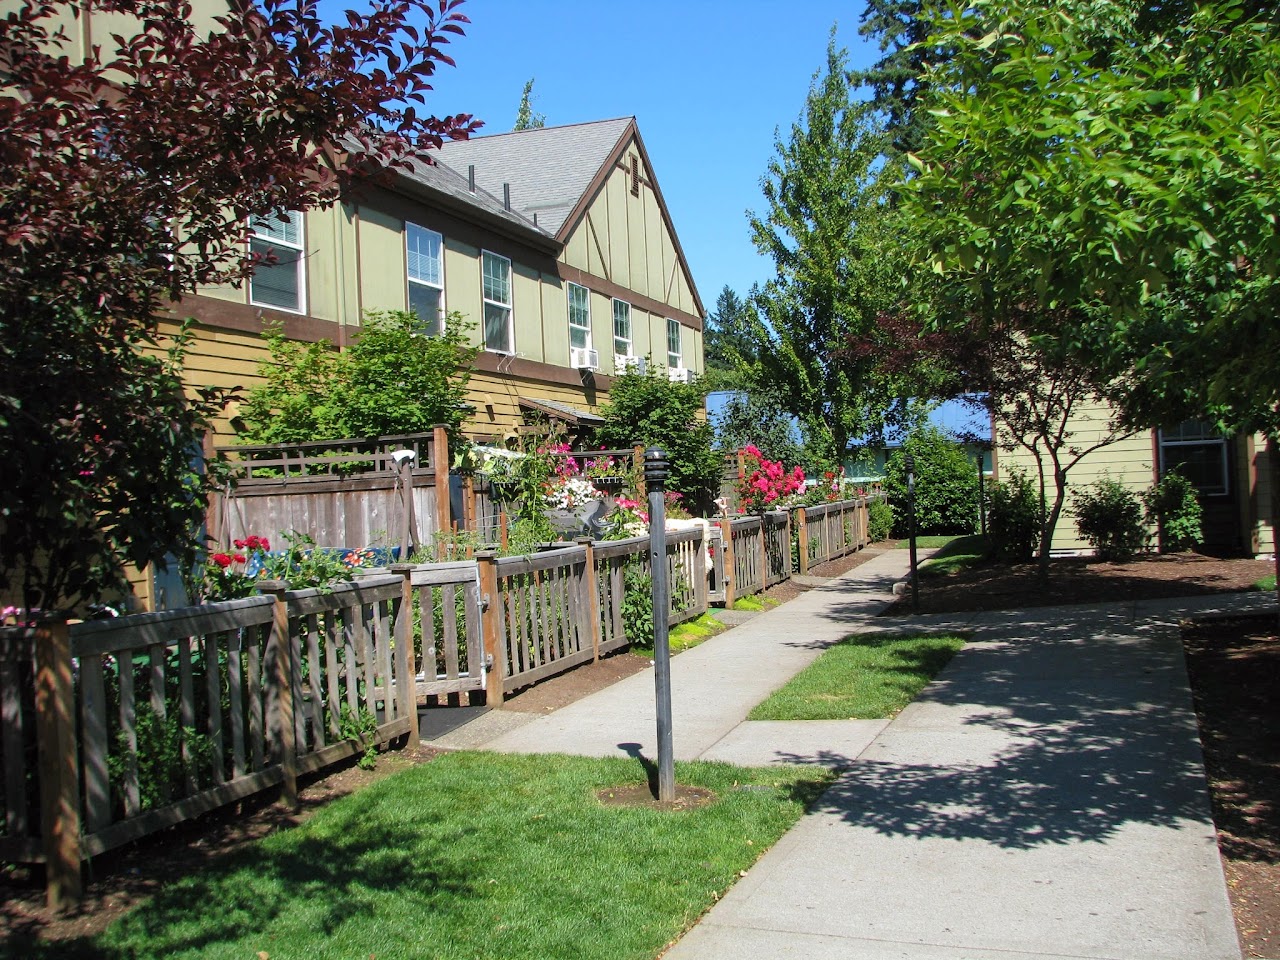 Photo of SPRINGWATER COMMONS. Affordable housing located at 6430 SE 128TH AVE PORTLAND, OR 97236